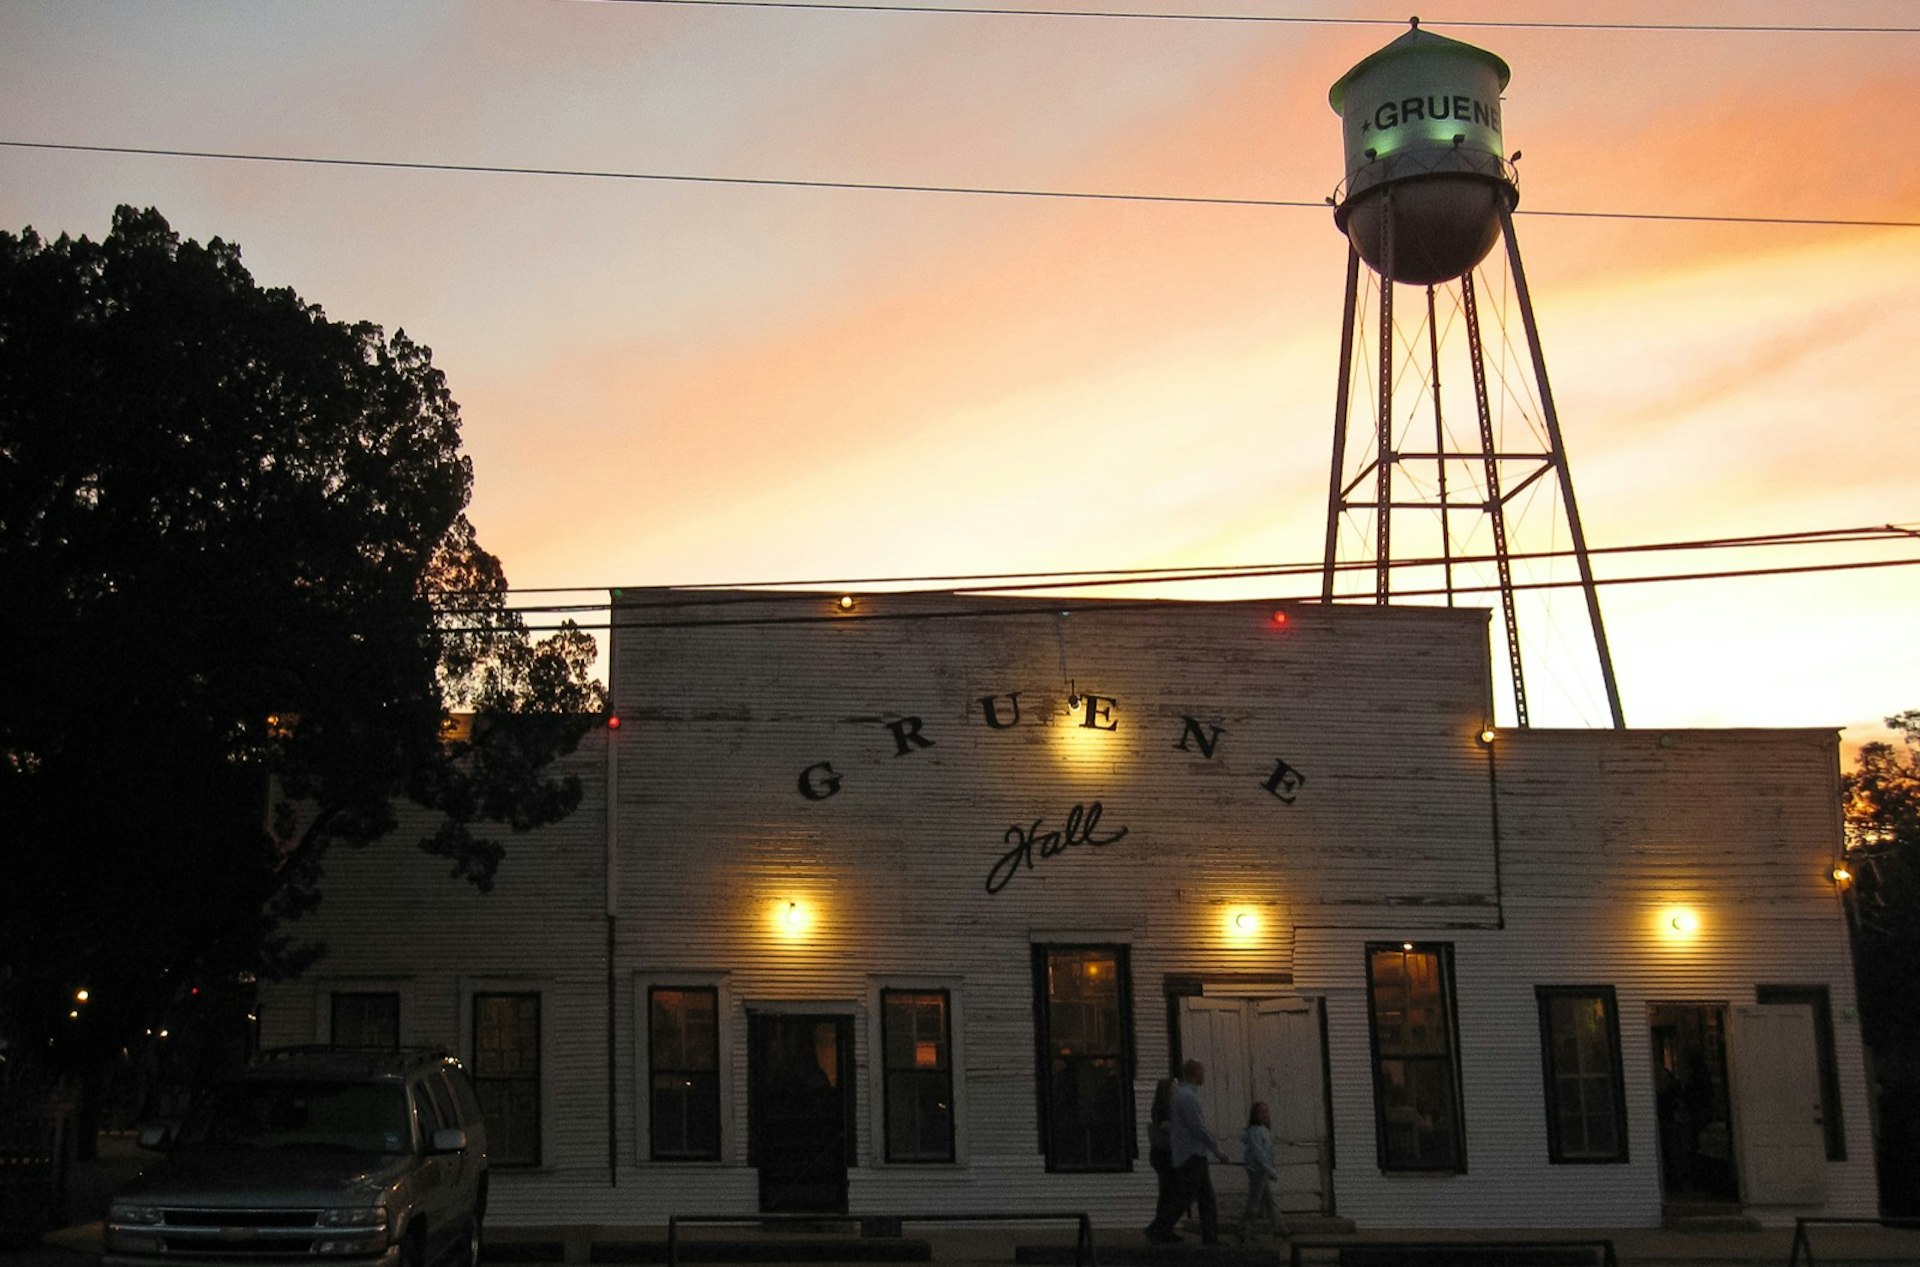 Small amber lights illuminate a whitewashed dance hall at sunset as a water tower looms in the background in the Hill Country